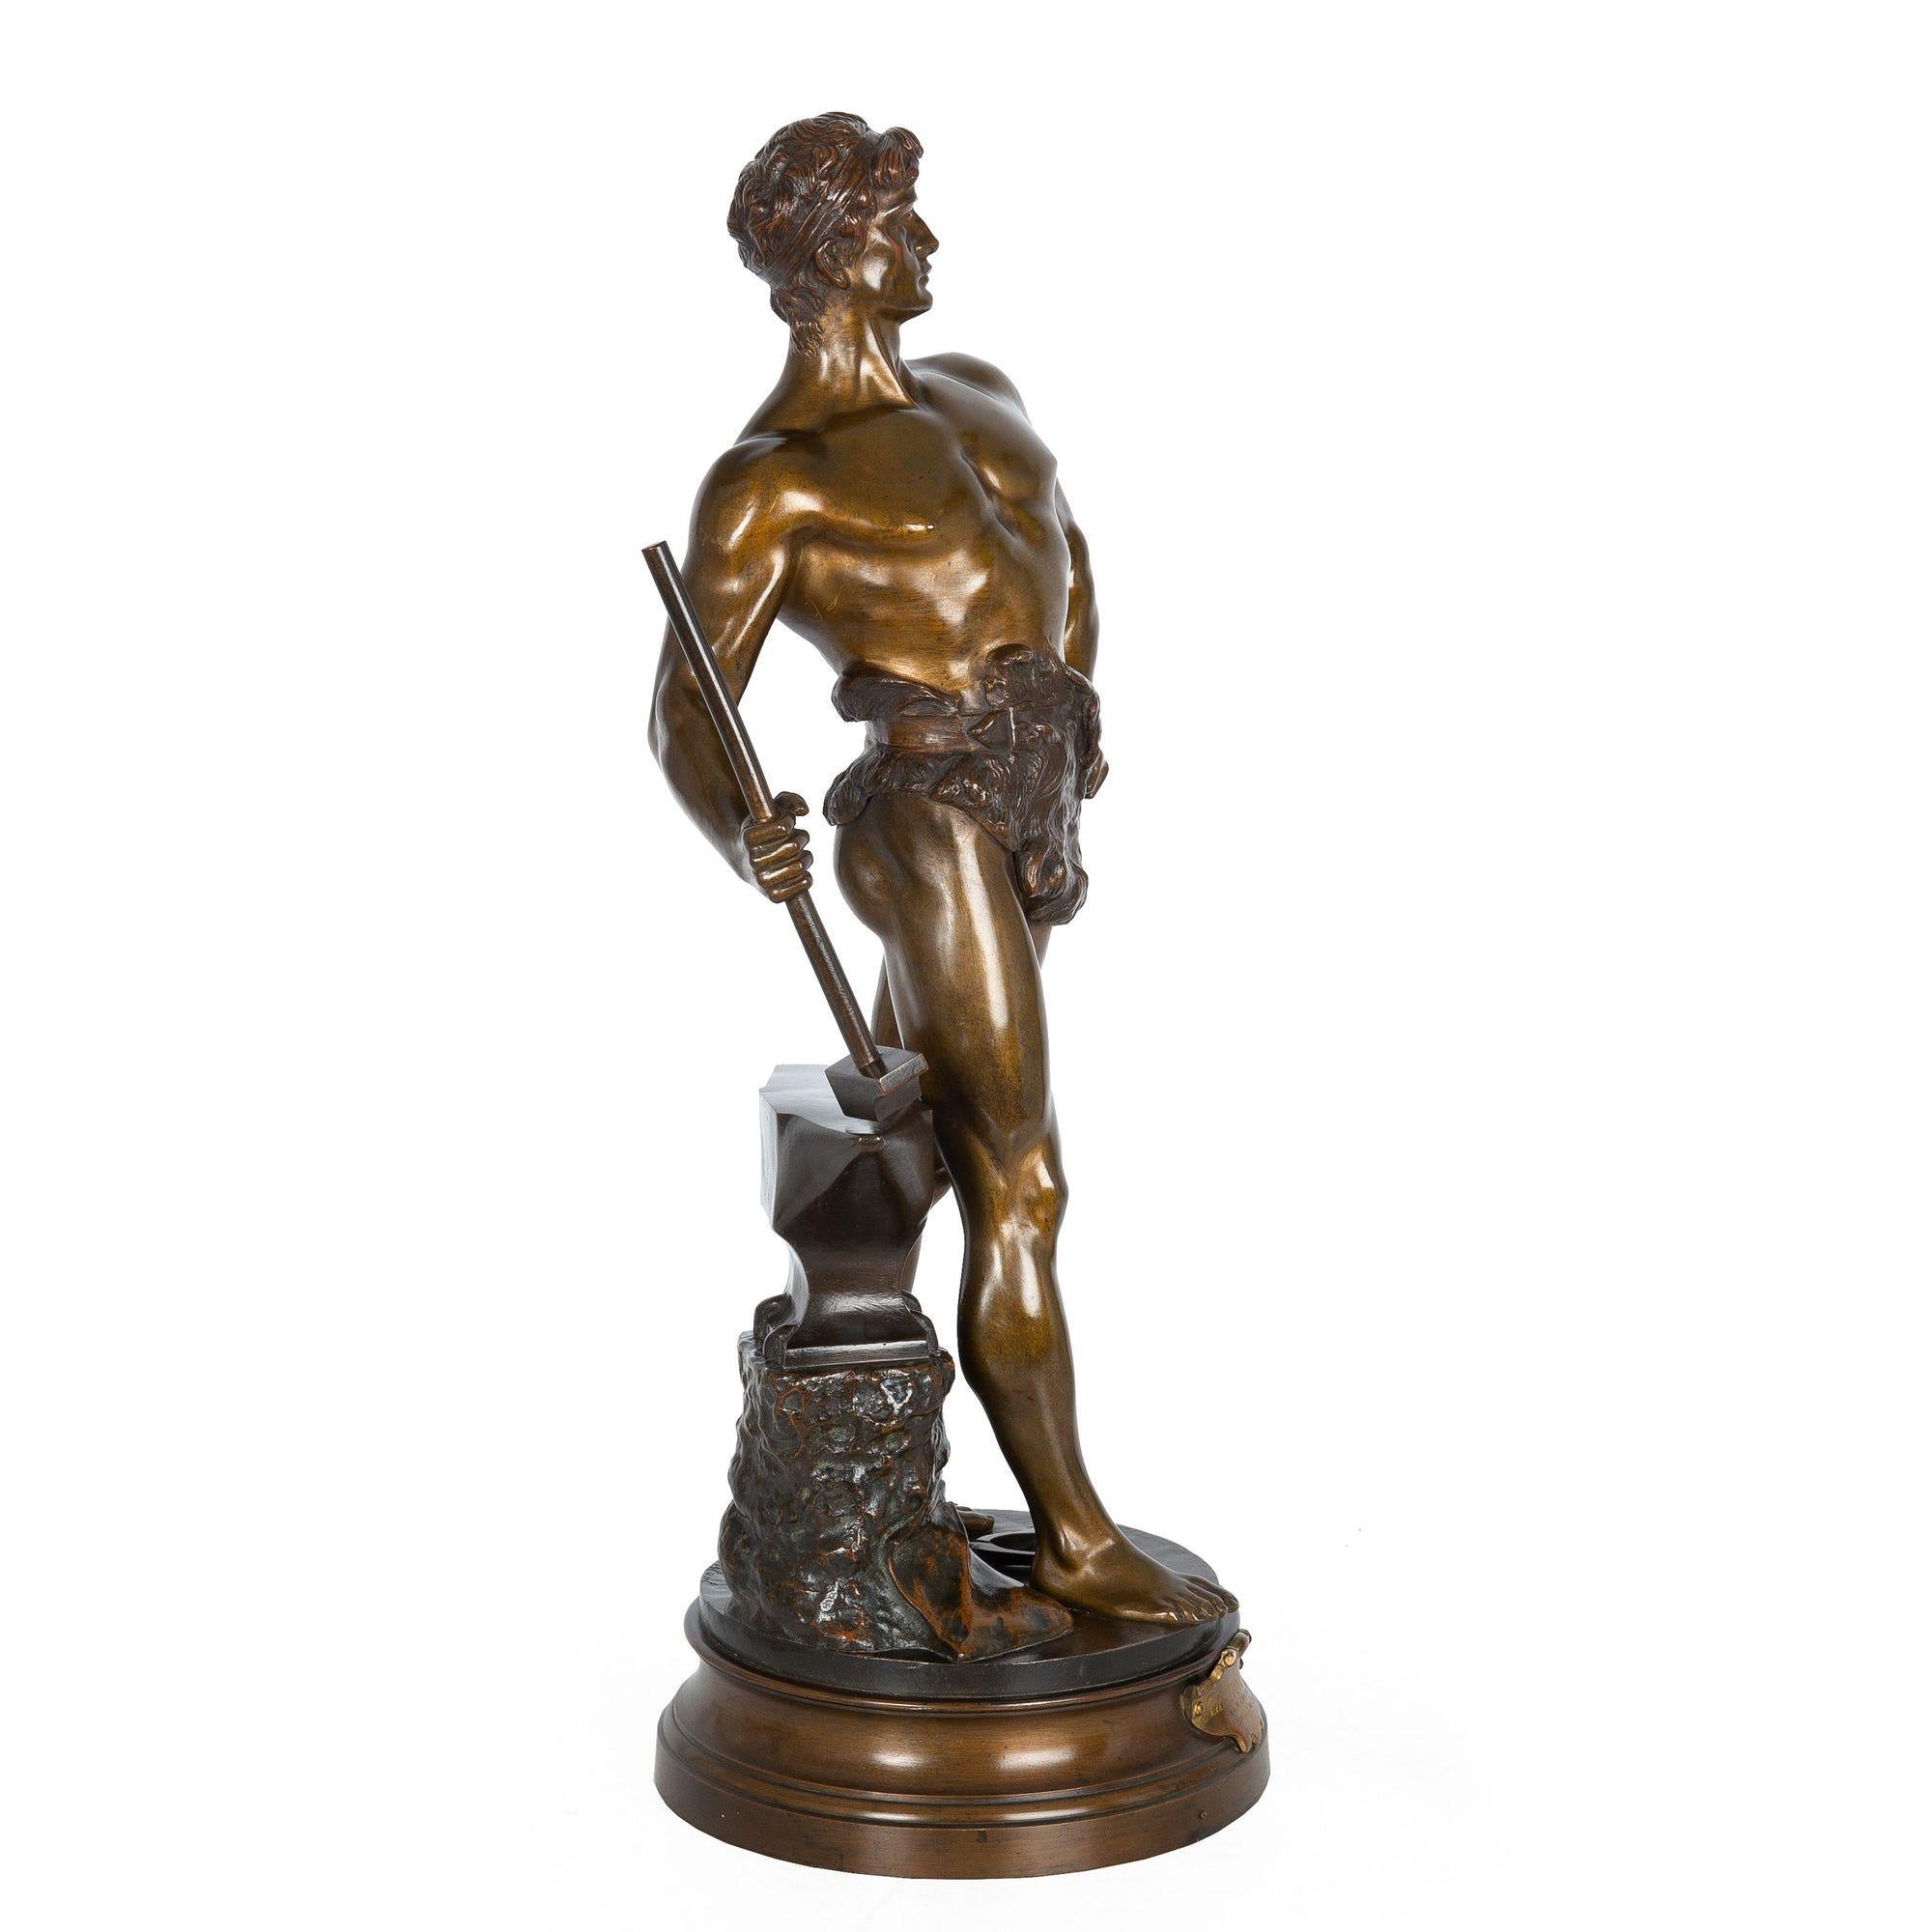 Romantic Antique French Bronze Sculpture of “Le Trevail” by Maurice Constant